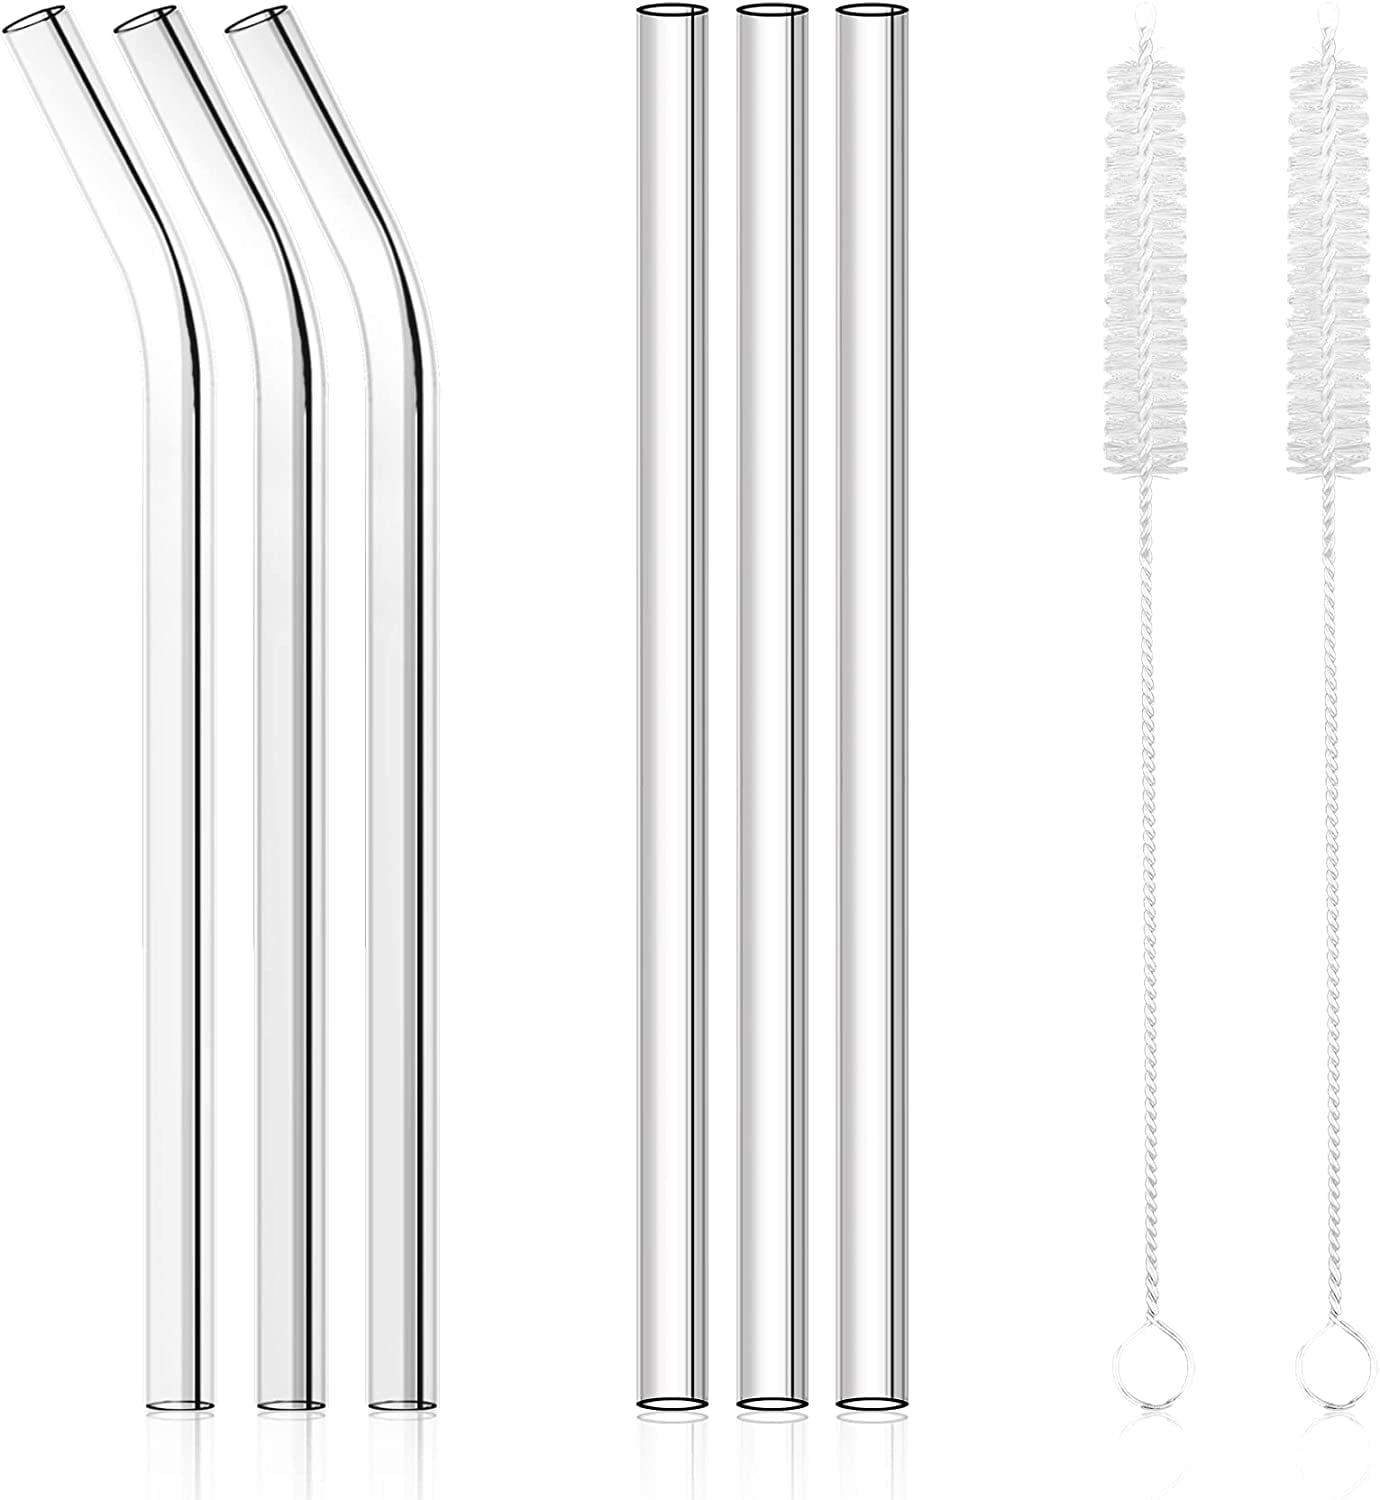  NETANY 16-Pack Reusable Glass Straws, Clear Glass Drinking  Straw, 10''x10 MM, Set of 6 Straight and 6 Bent with 4 Cleaning Brushes -  Perfect for Smoothies, Milkshakes, Tea, Juice - Dishwasher